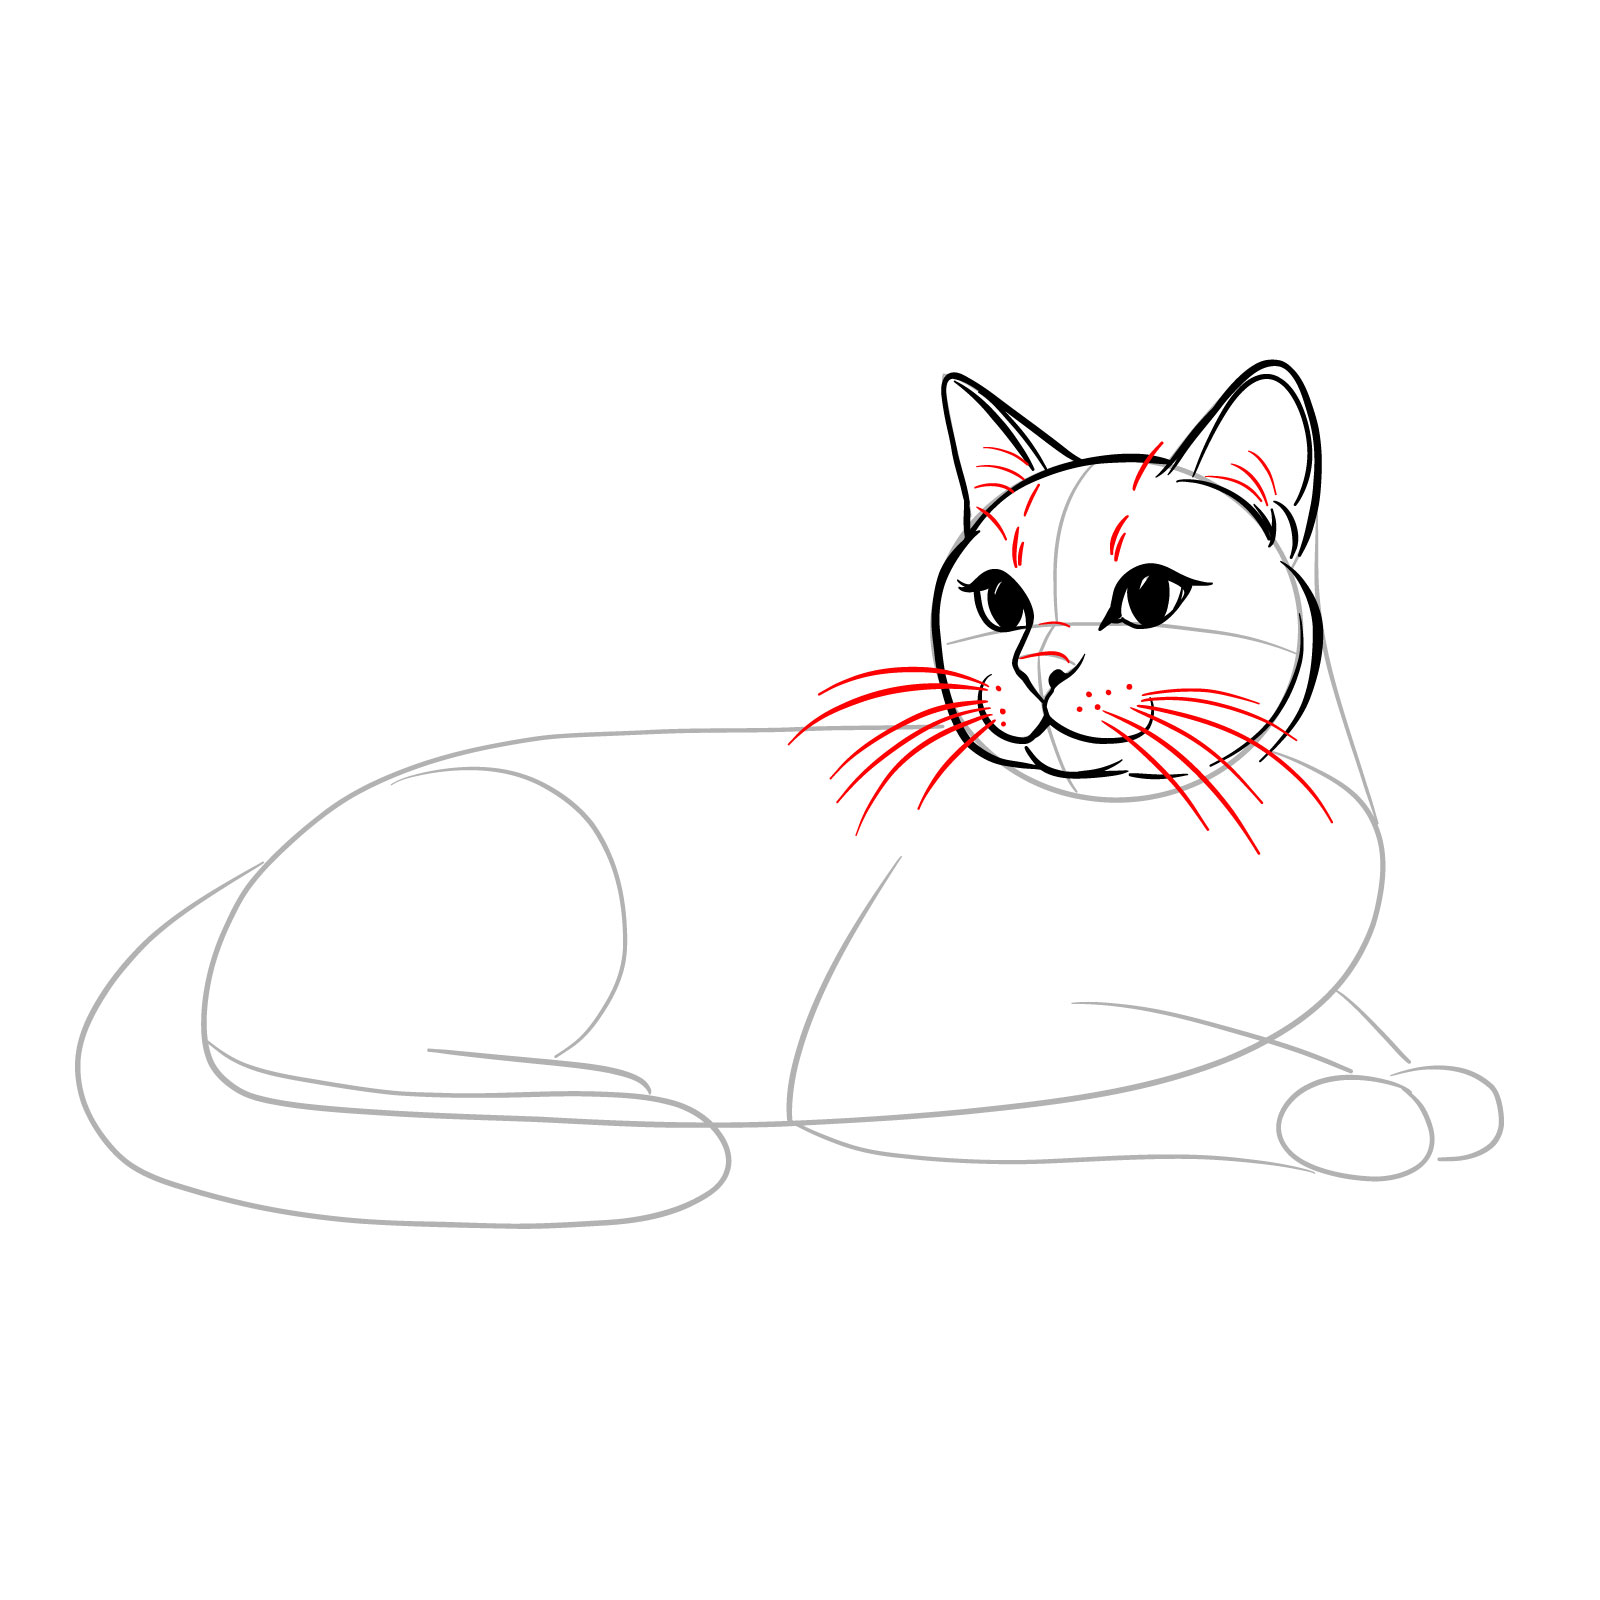 Sketch showing the addition of whiskers and fur texture to the head of a cat in a lying side view pose - step 09